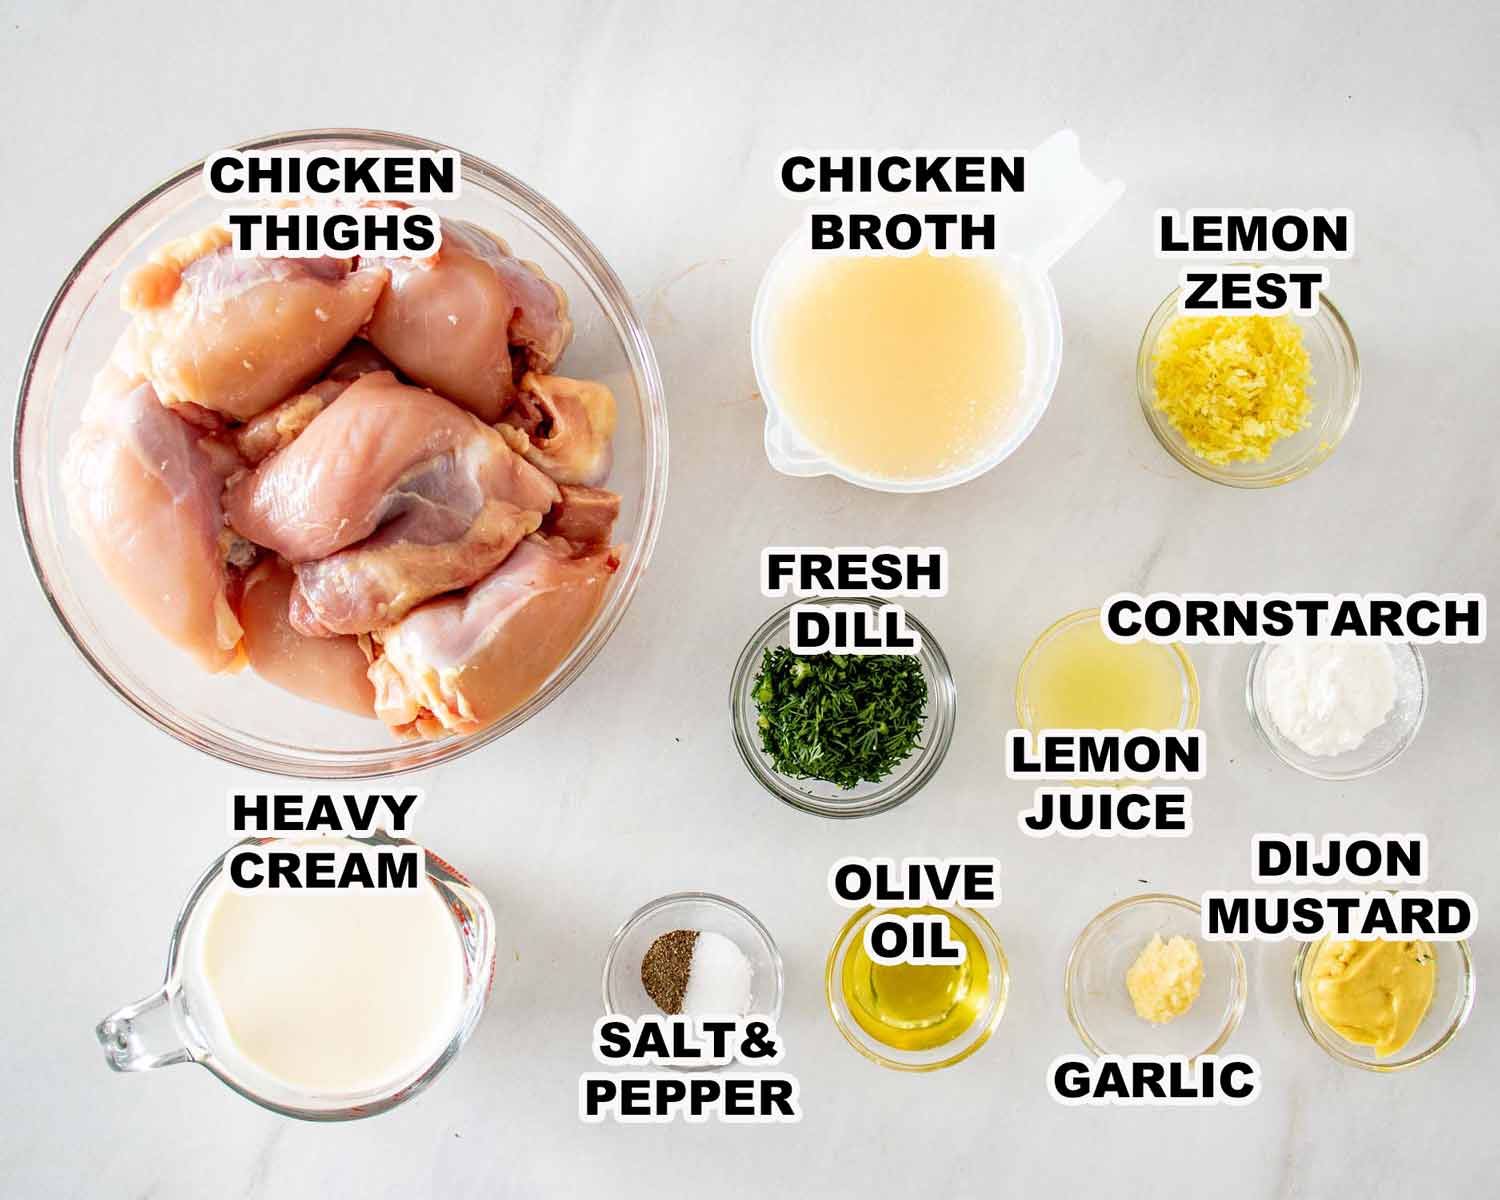 ingredients needed to make chicken thighs with creamy lemon dill sauce.